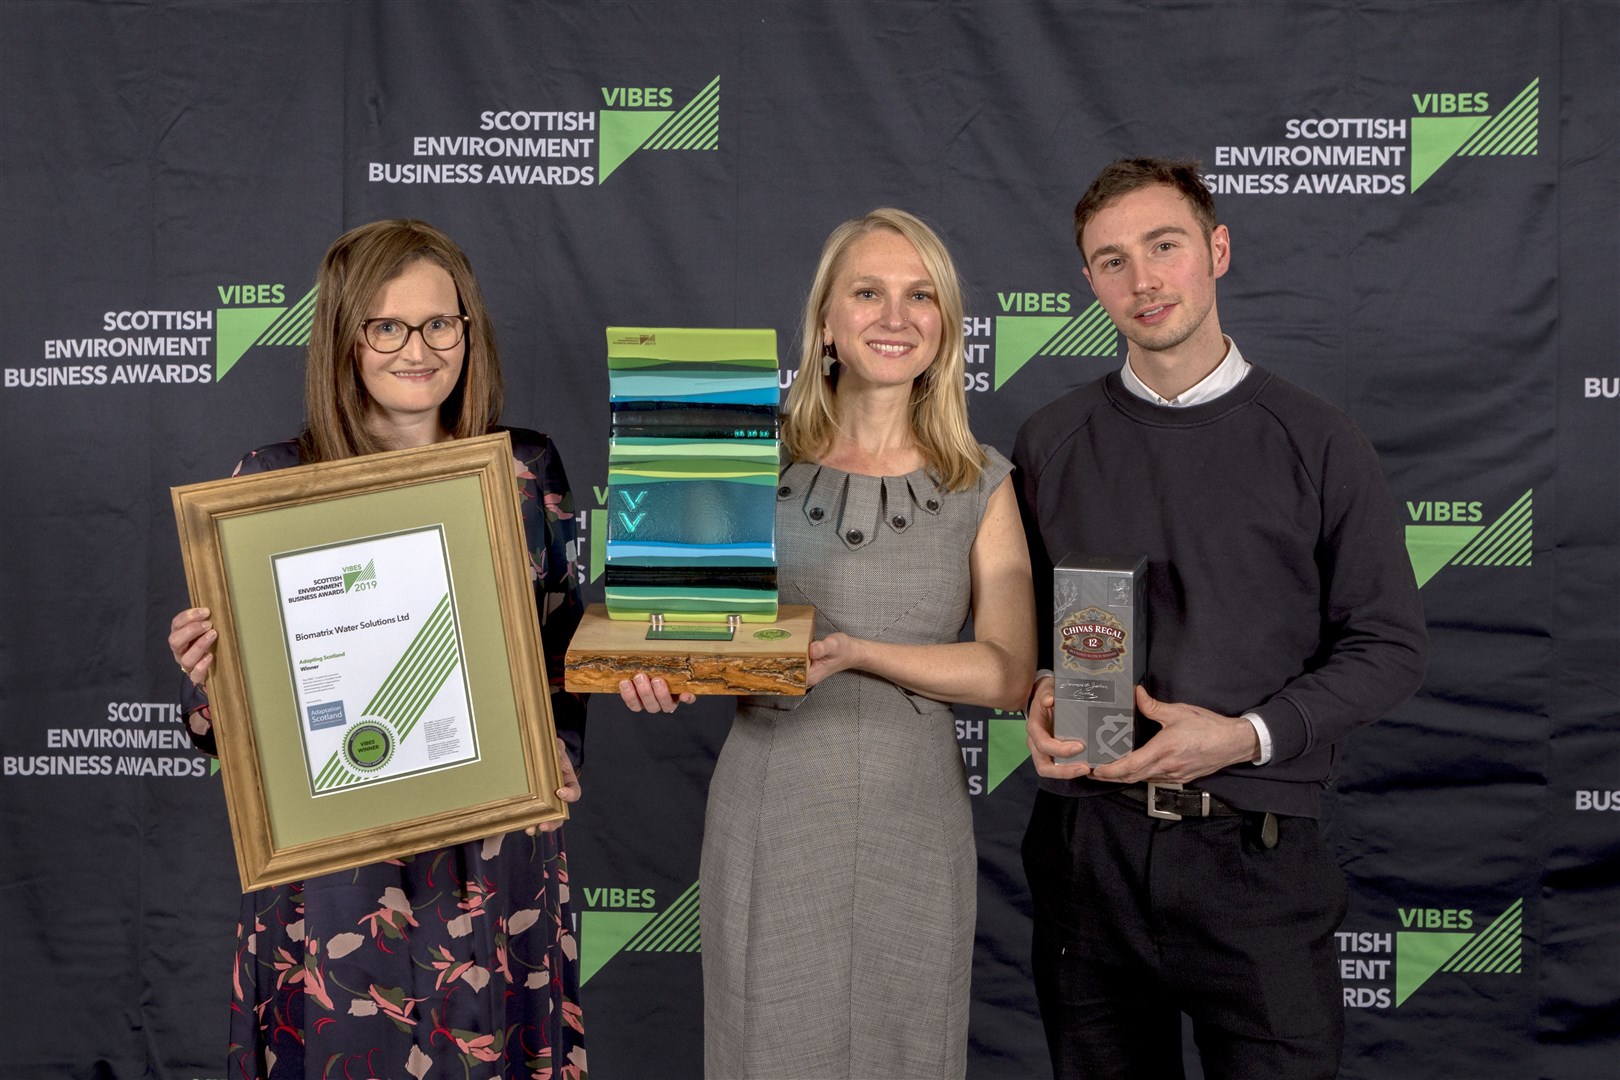 The Vibes Awards recognise the best in good practice or innovation from Scottish business.